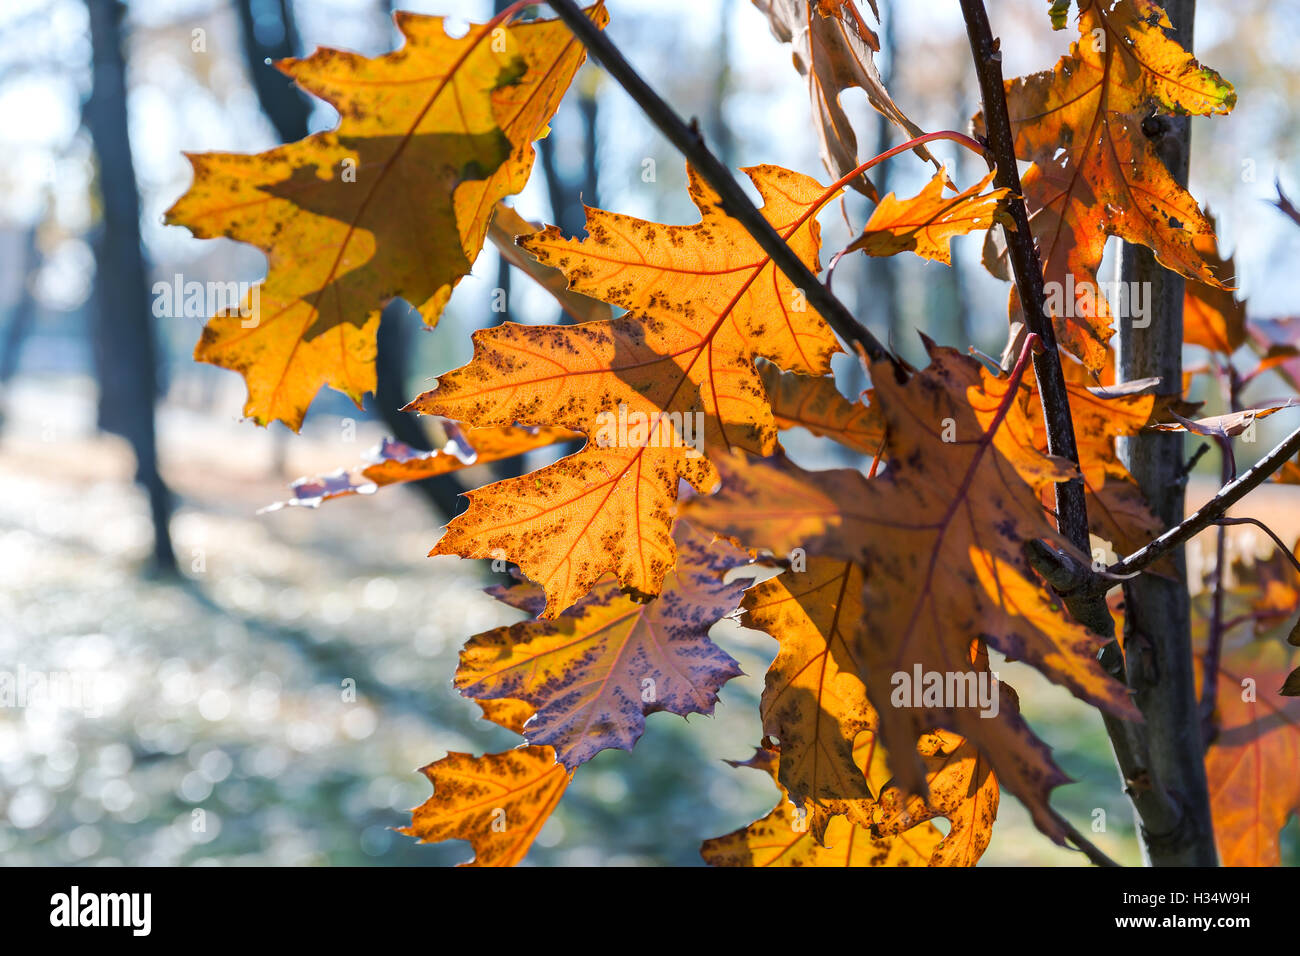 branch of maple tree with golden foliage during fall season Stock Photo